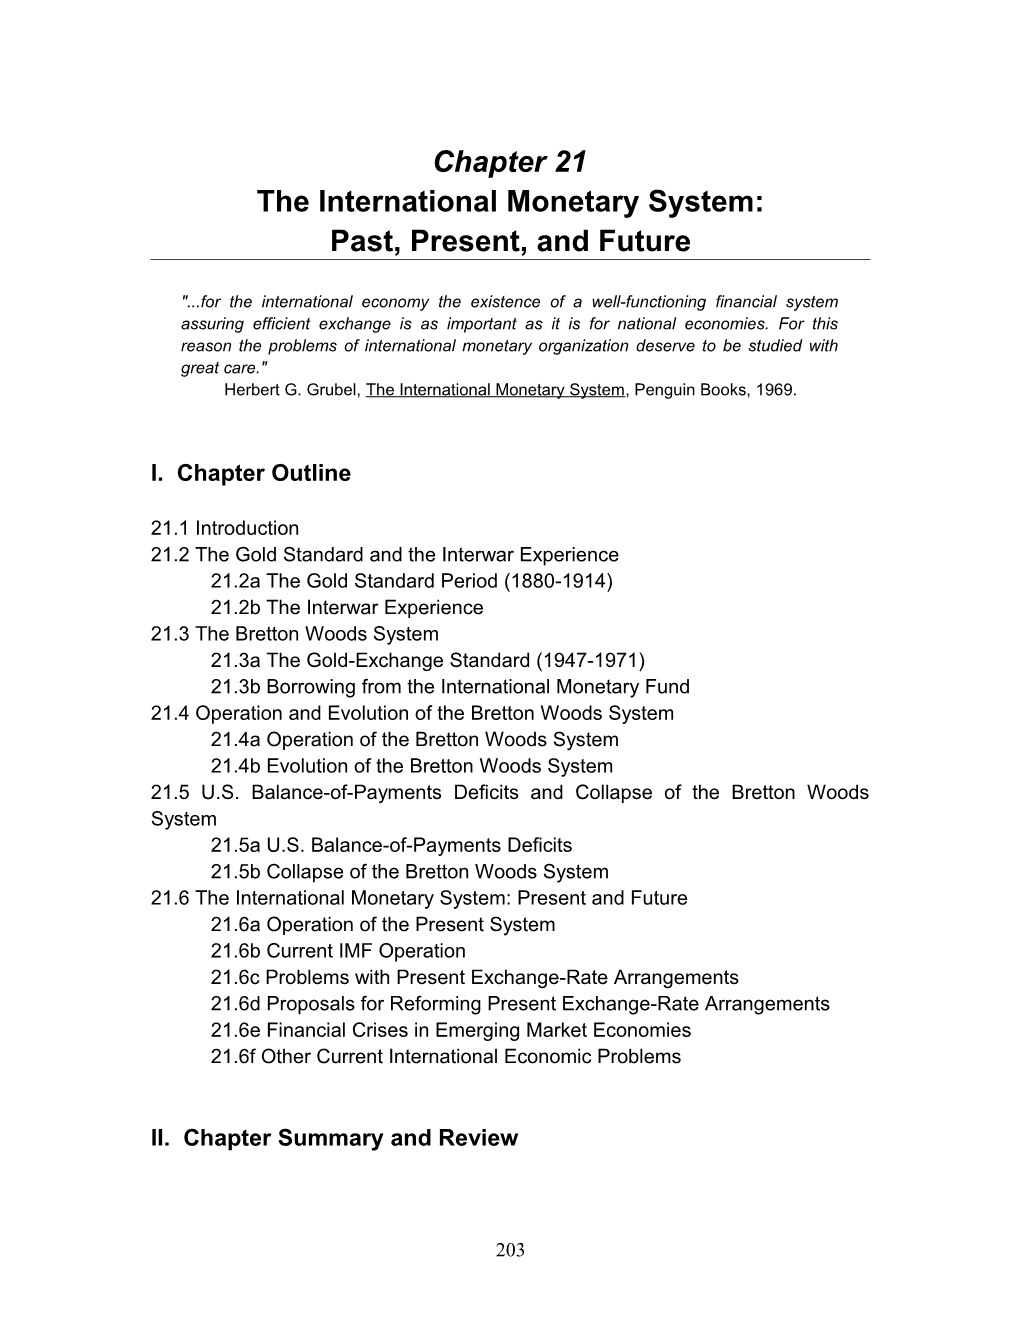 Chapter 21 / the International Monetary System: Past, Present and Future